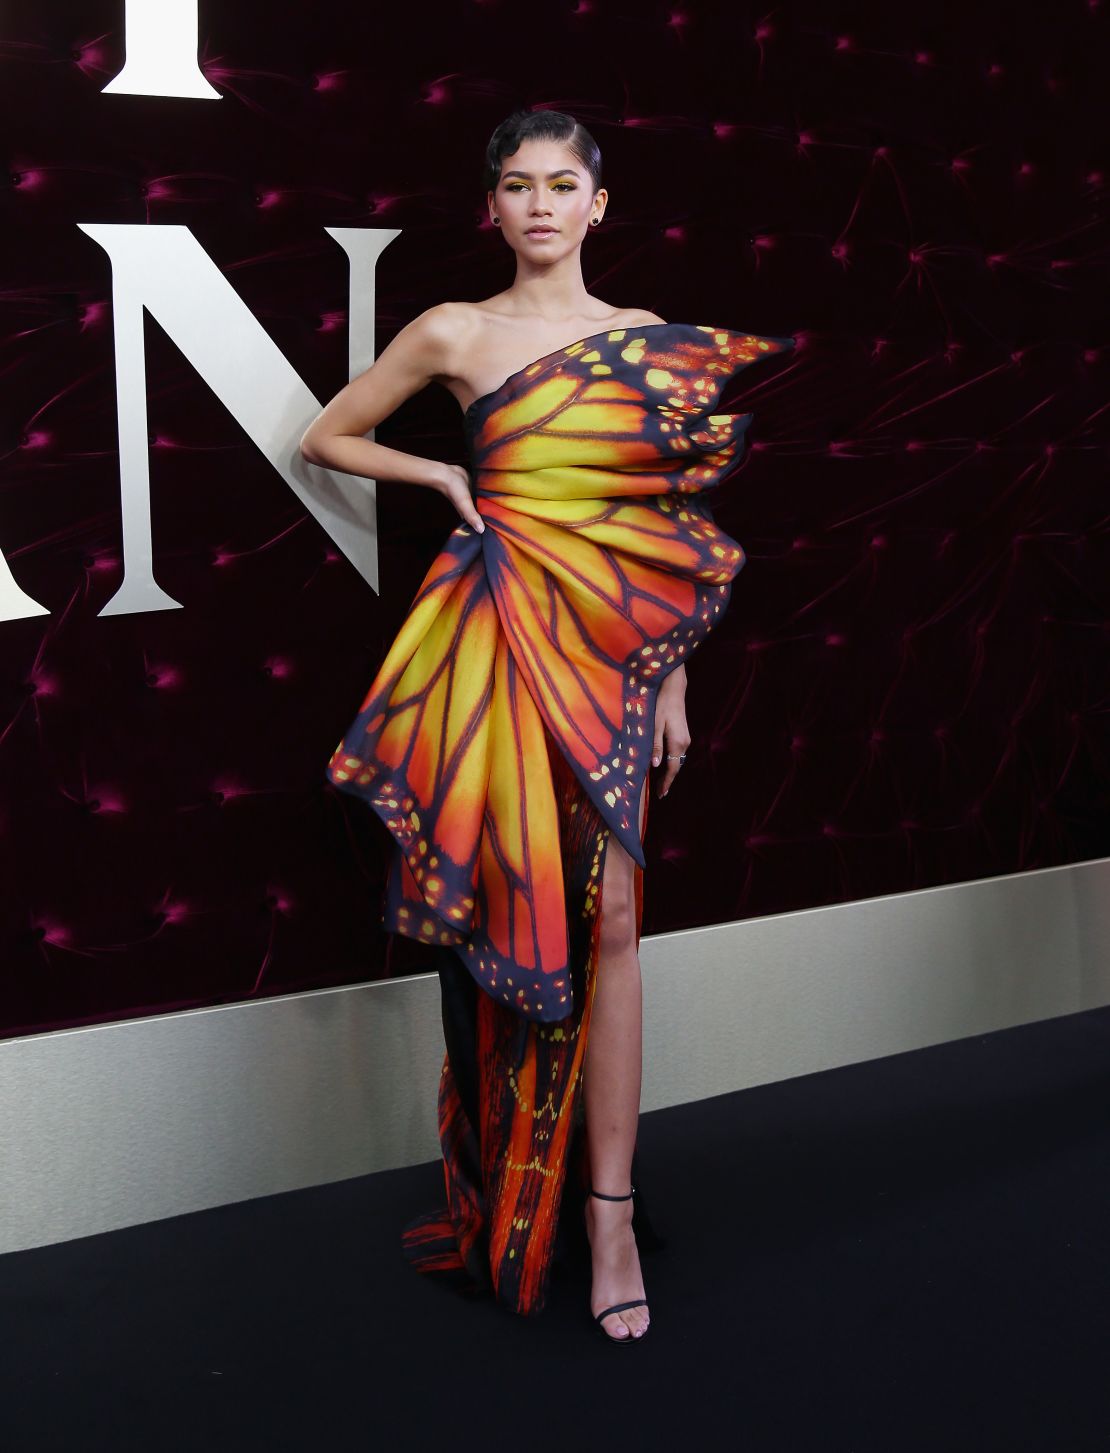 Zendaya often channels the spirit of her movies through her outfits -- as seen with the Moschino butterfly dress she wore to a 2017 premiere of "The Greatest Showman."